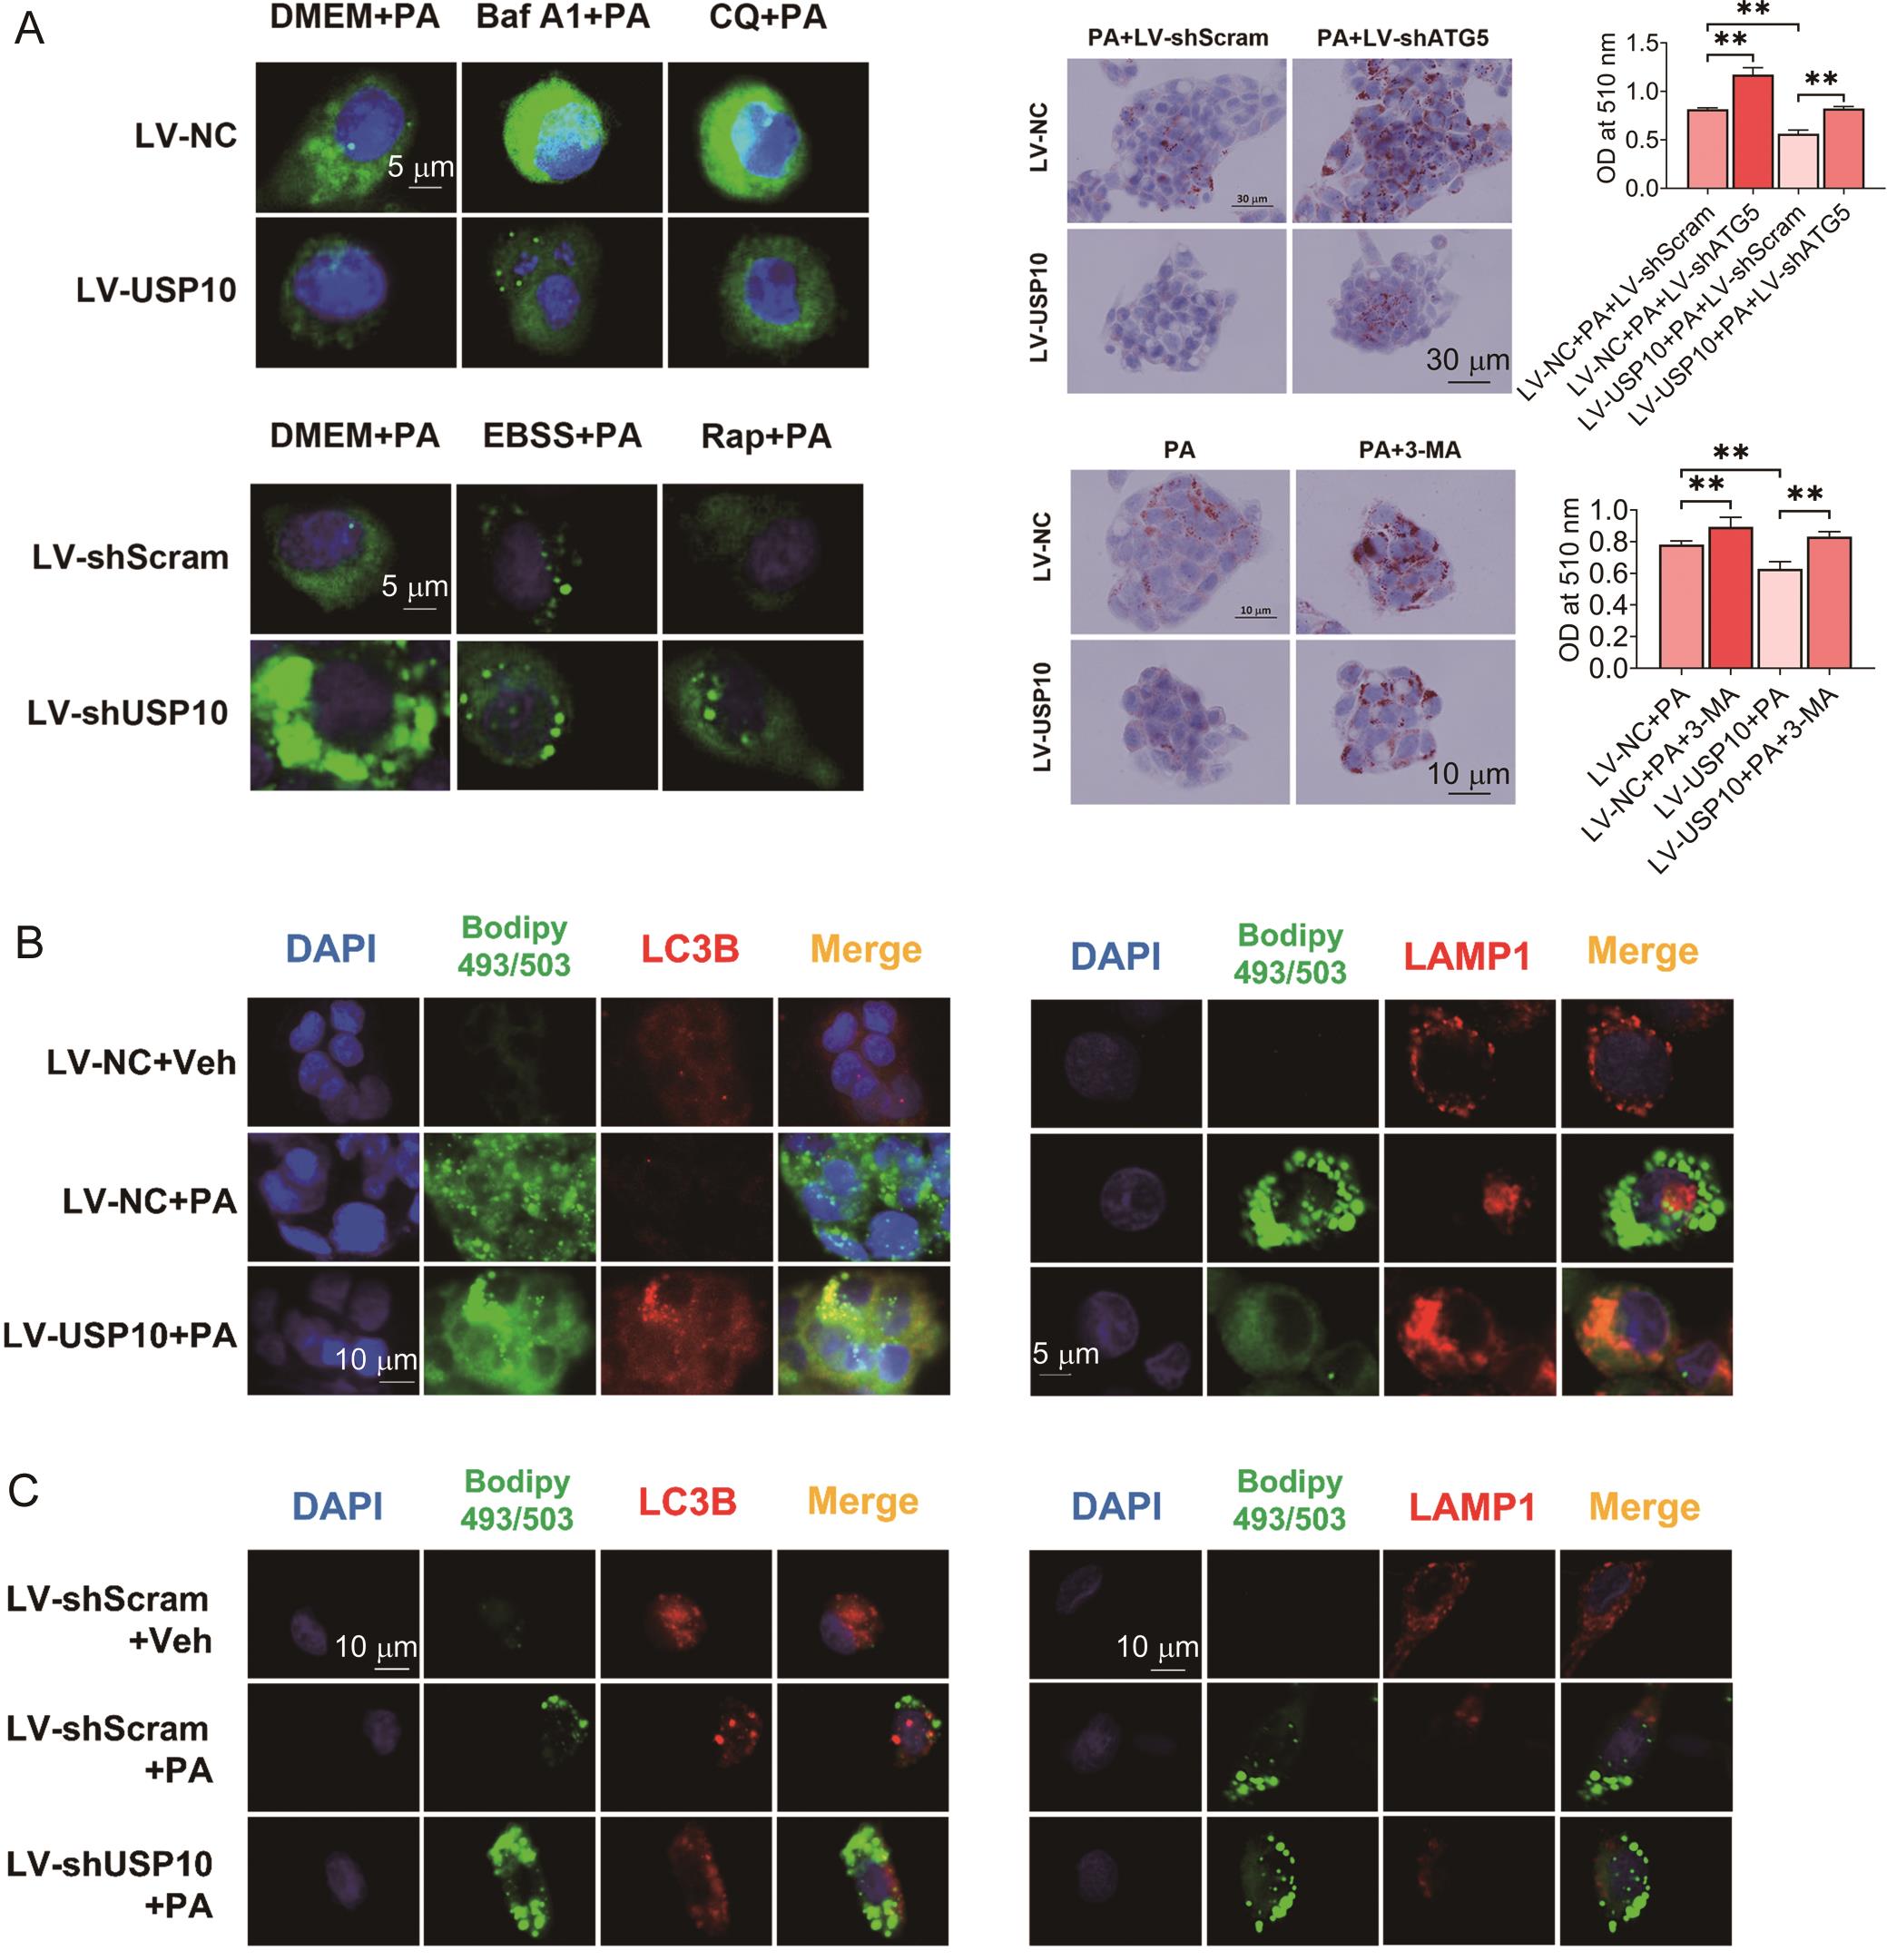 USP10 promoted lipid-targeted autophagy of HepG2 cells.